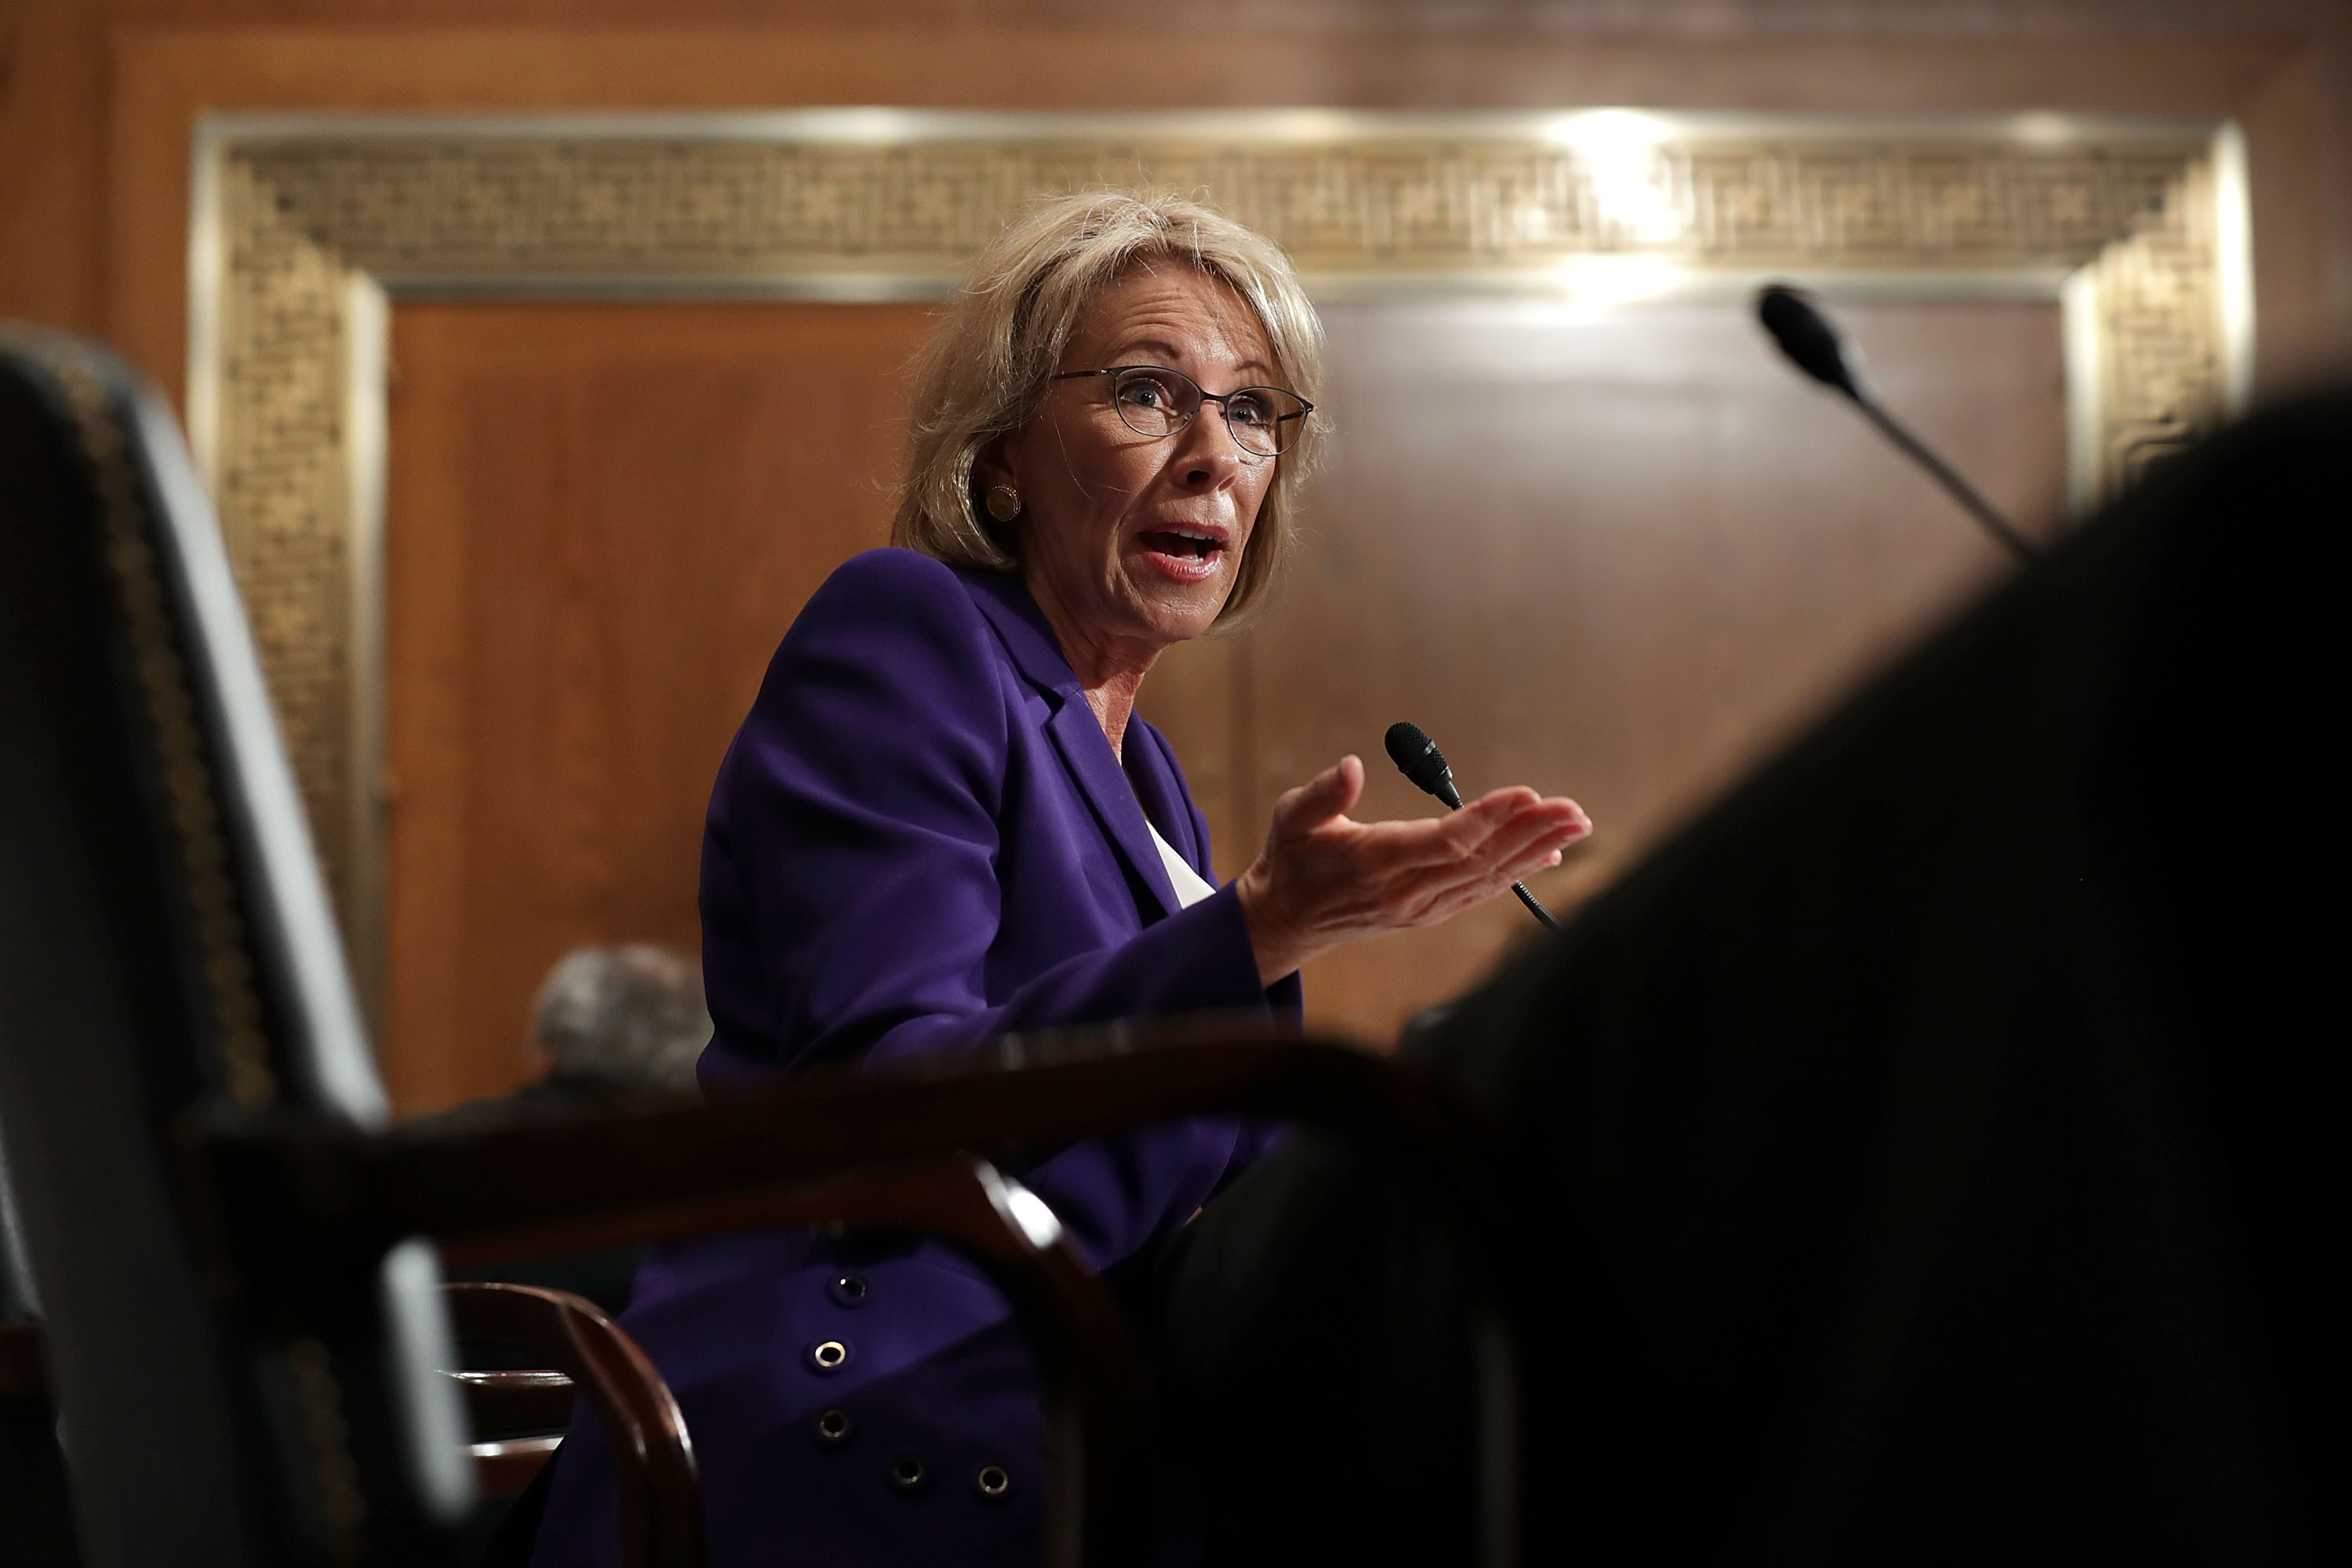 Betsy DeVos, President Donald Trump's pick to be the next Secretary of Education, testifies during her confirmation hearing before the Senate Health, Education, Labor and Pensions Committee on Jan. 17, 2017 in Washington, D.C. (Chip Somodevilla&mdash;Getty Images)